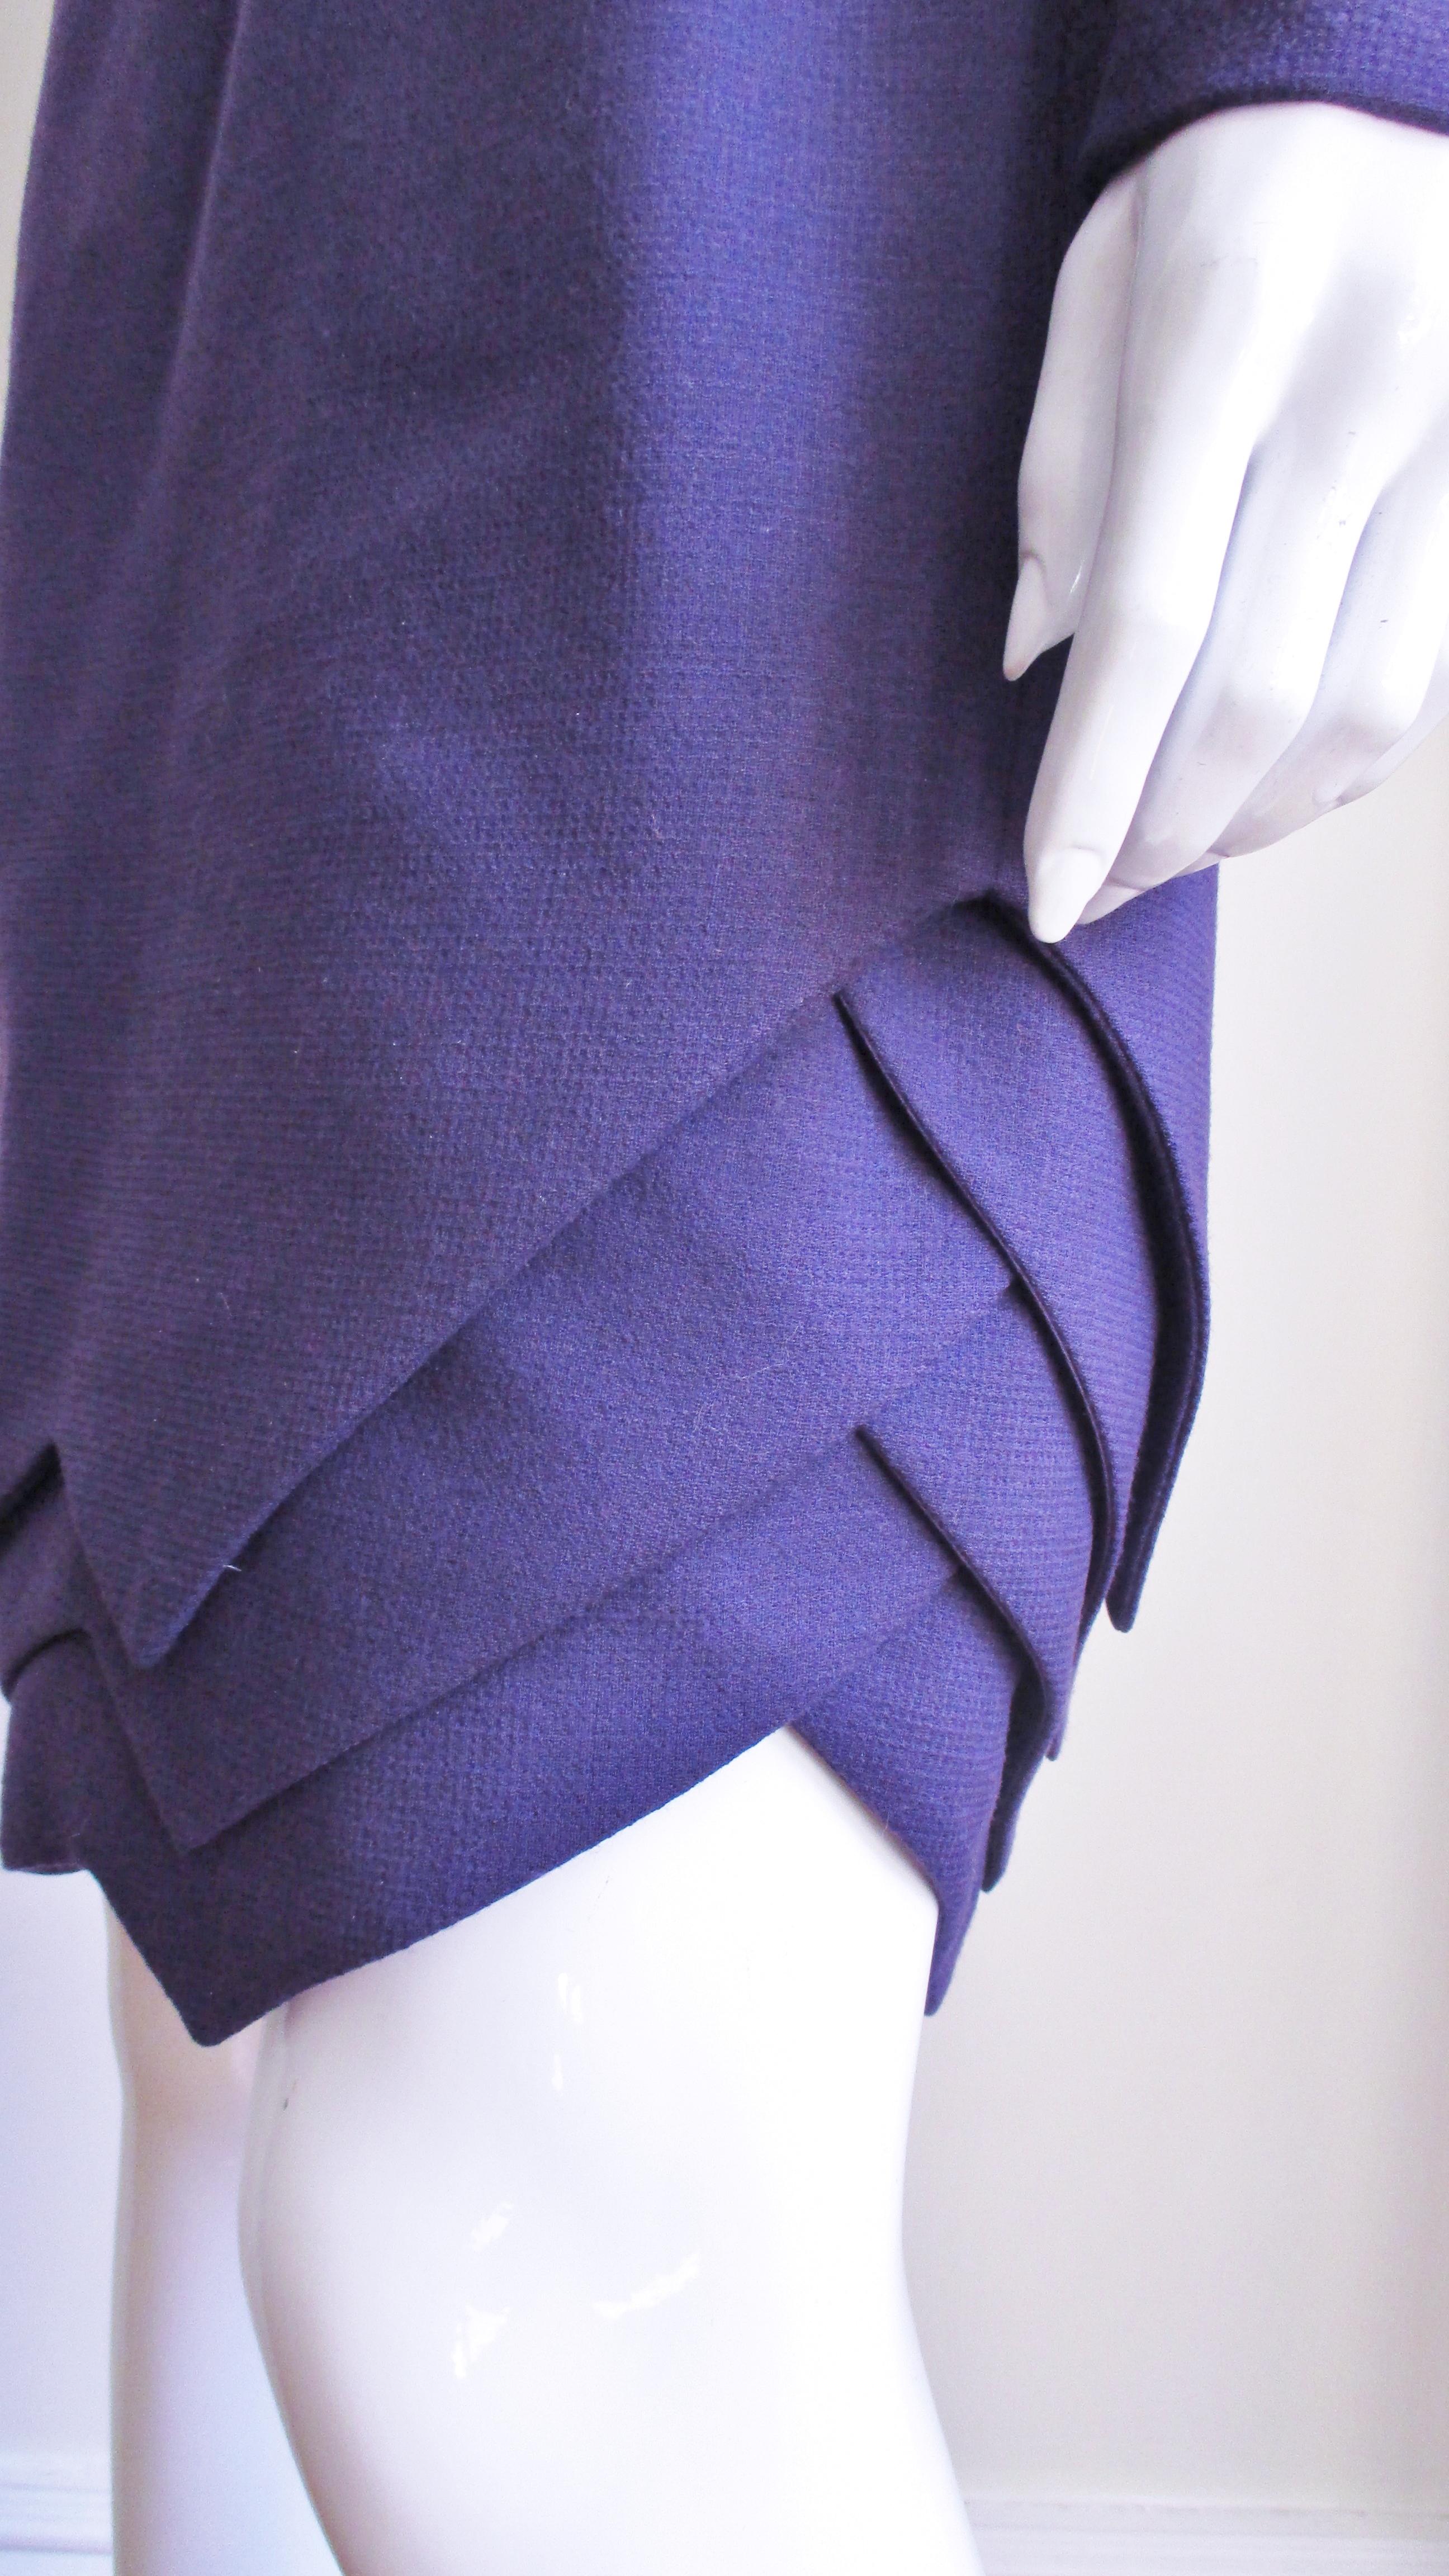 Gianni Versace Purple 1990s Dress with Origami Hem  For Sale 6